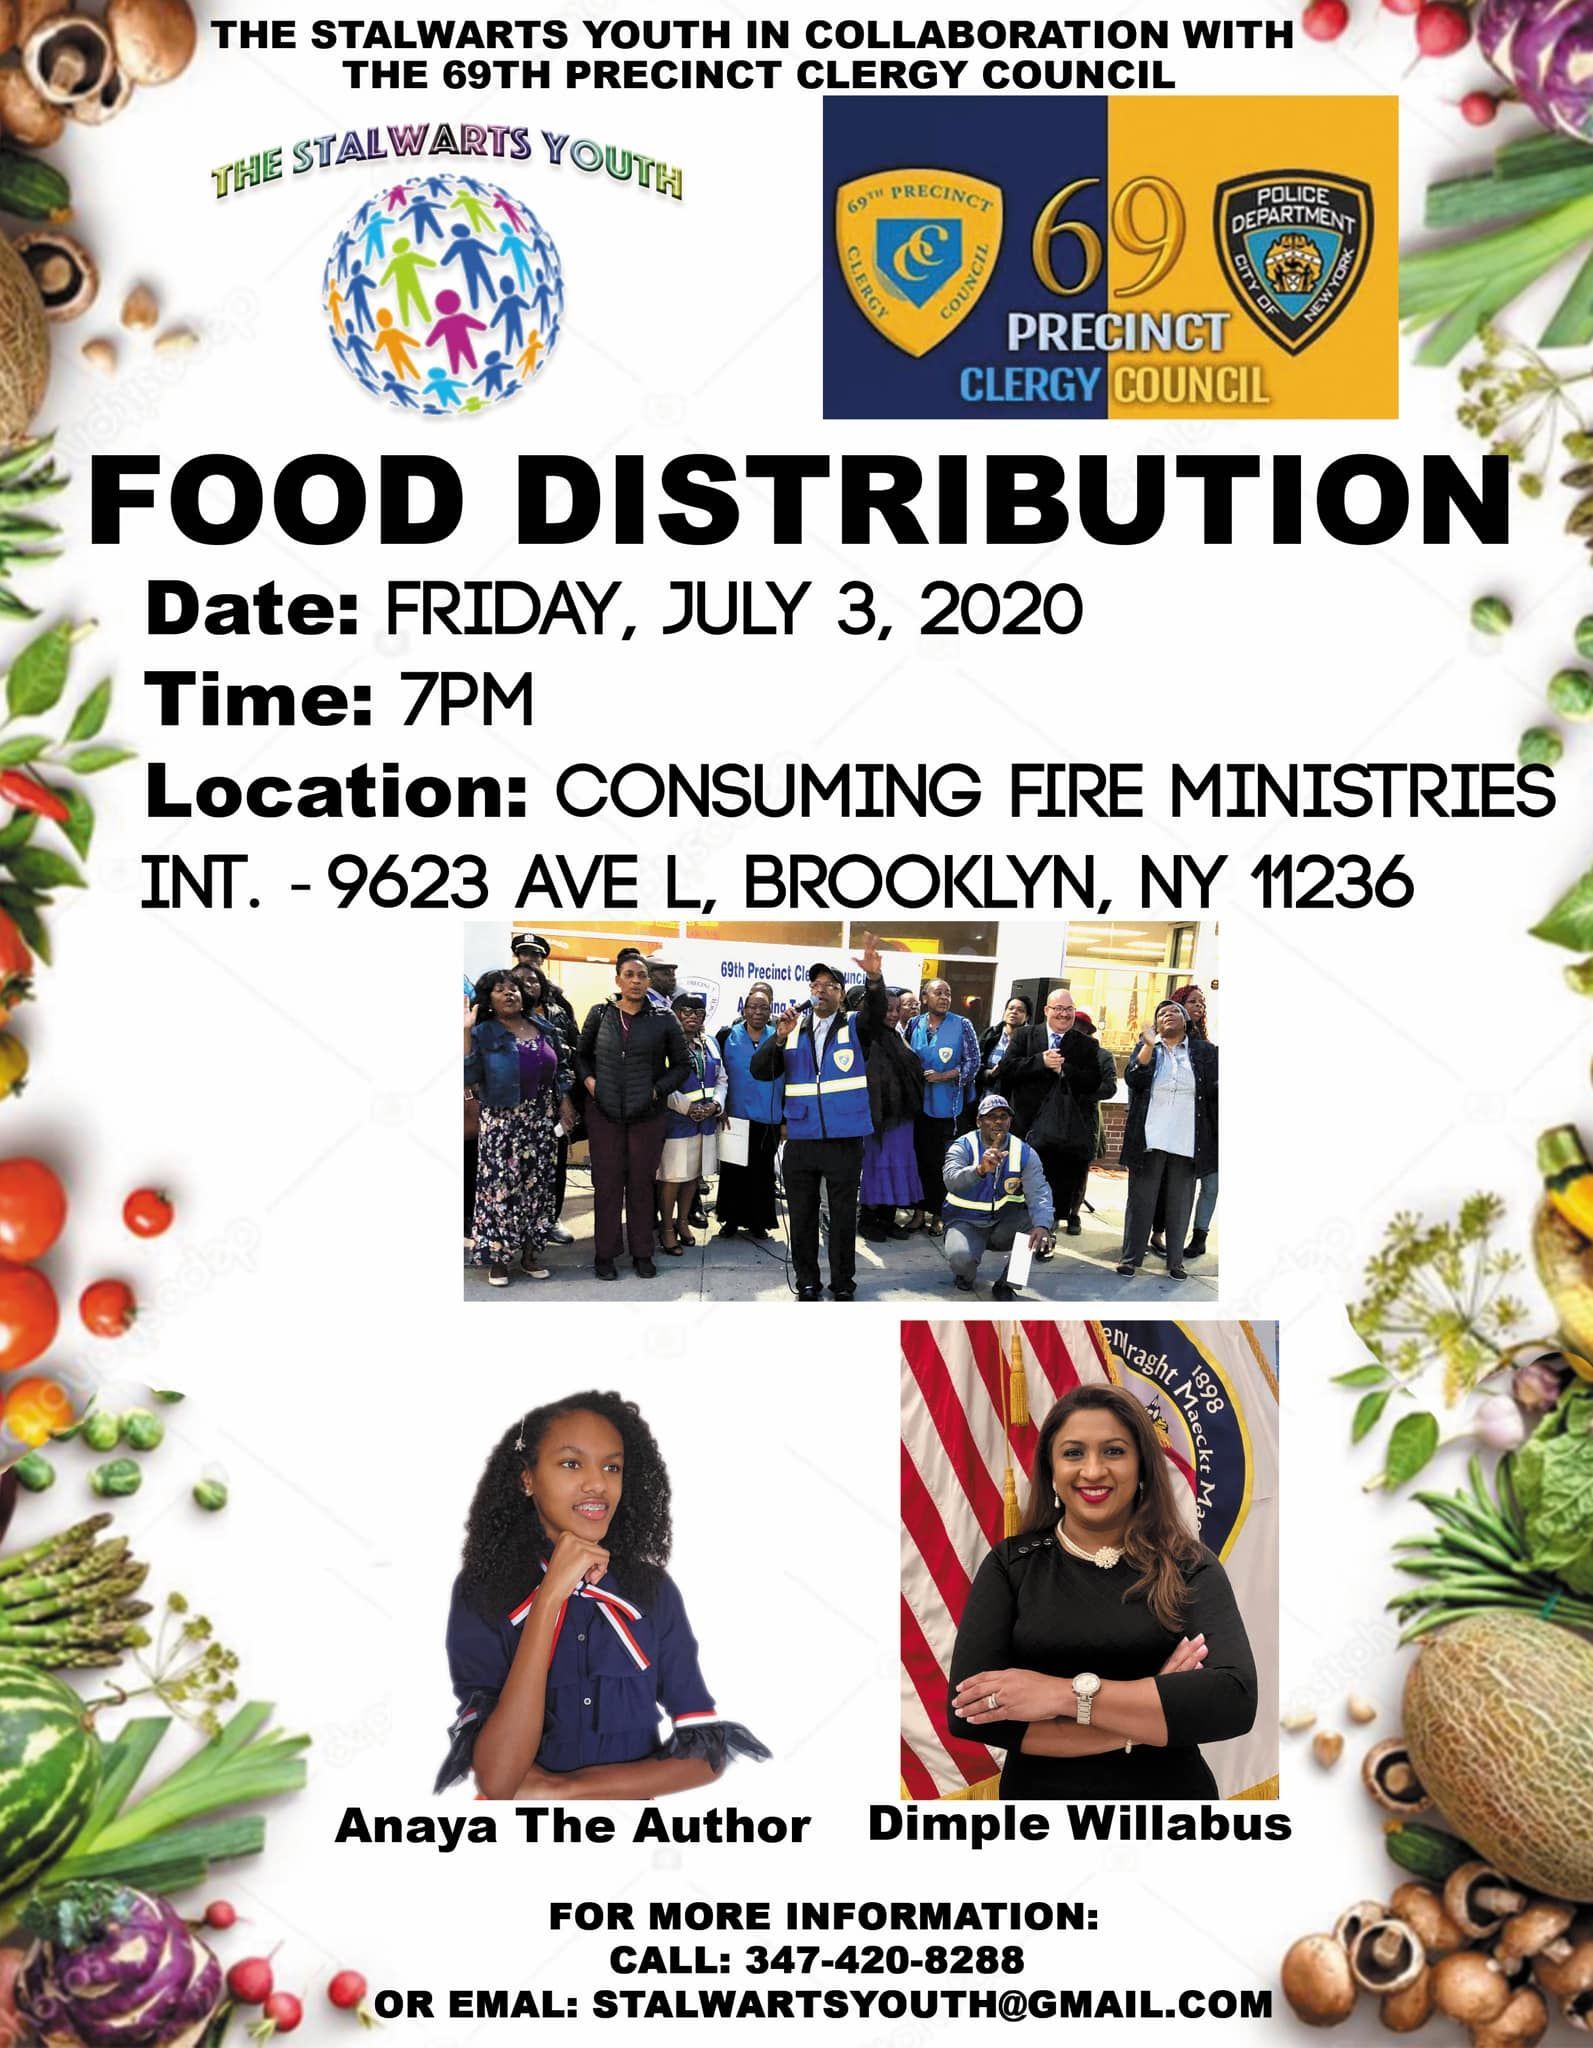 Stalwarts Youth Food Distribution in collaboration with 69th Precinct Clergy Council at Consuming Fire Ministries in Brooklyn, NY on July 3, 2020